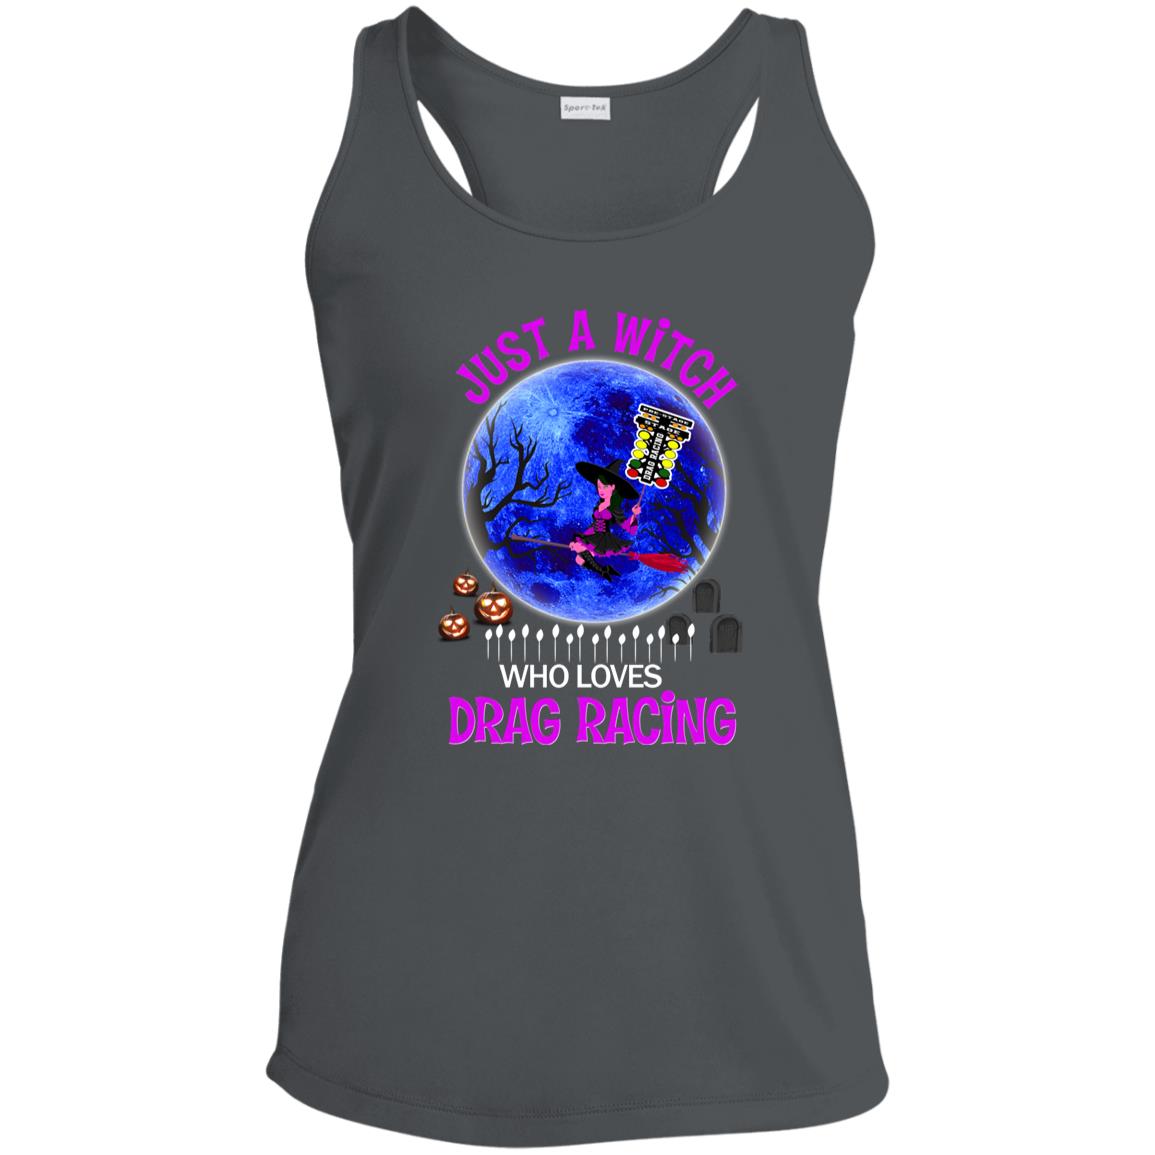 Just A Witch Who Loves Drag Racing Ladies' Performance Racerback Tank